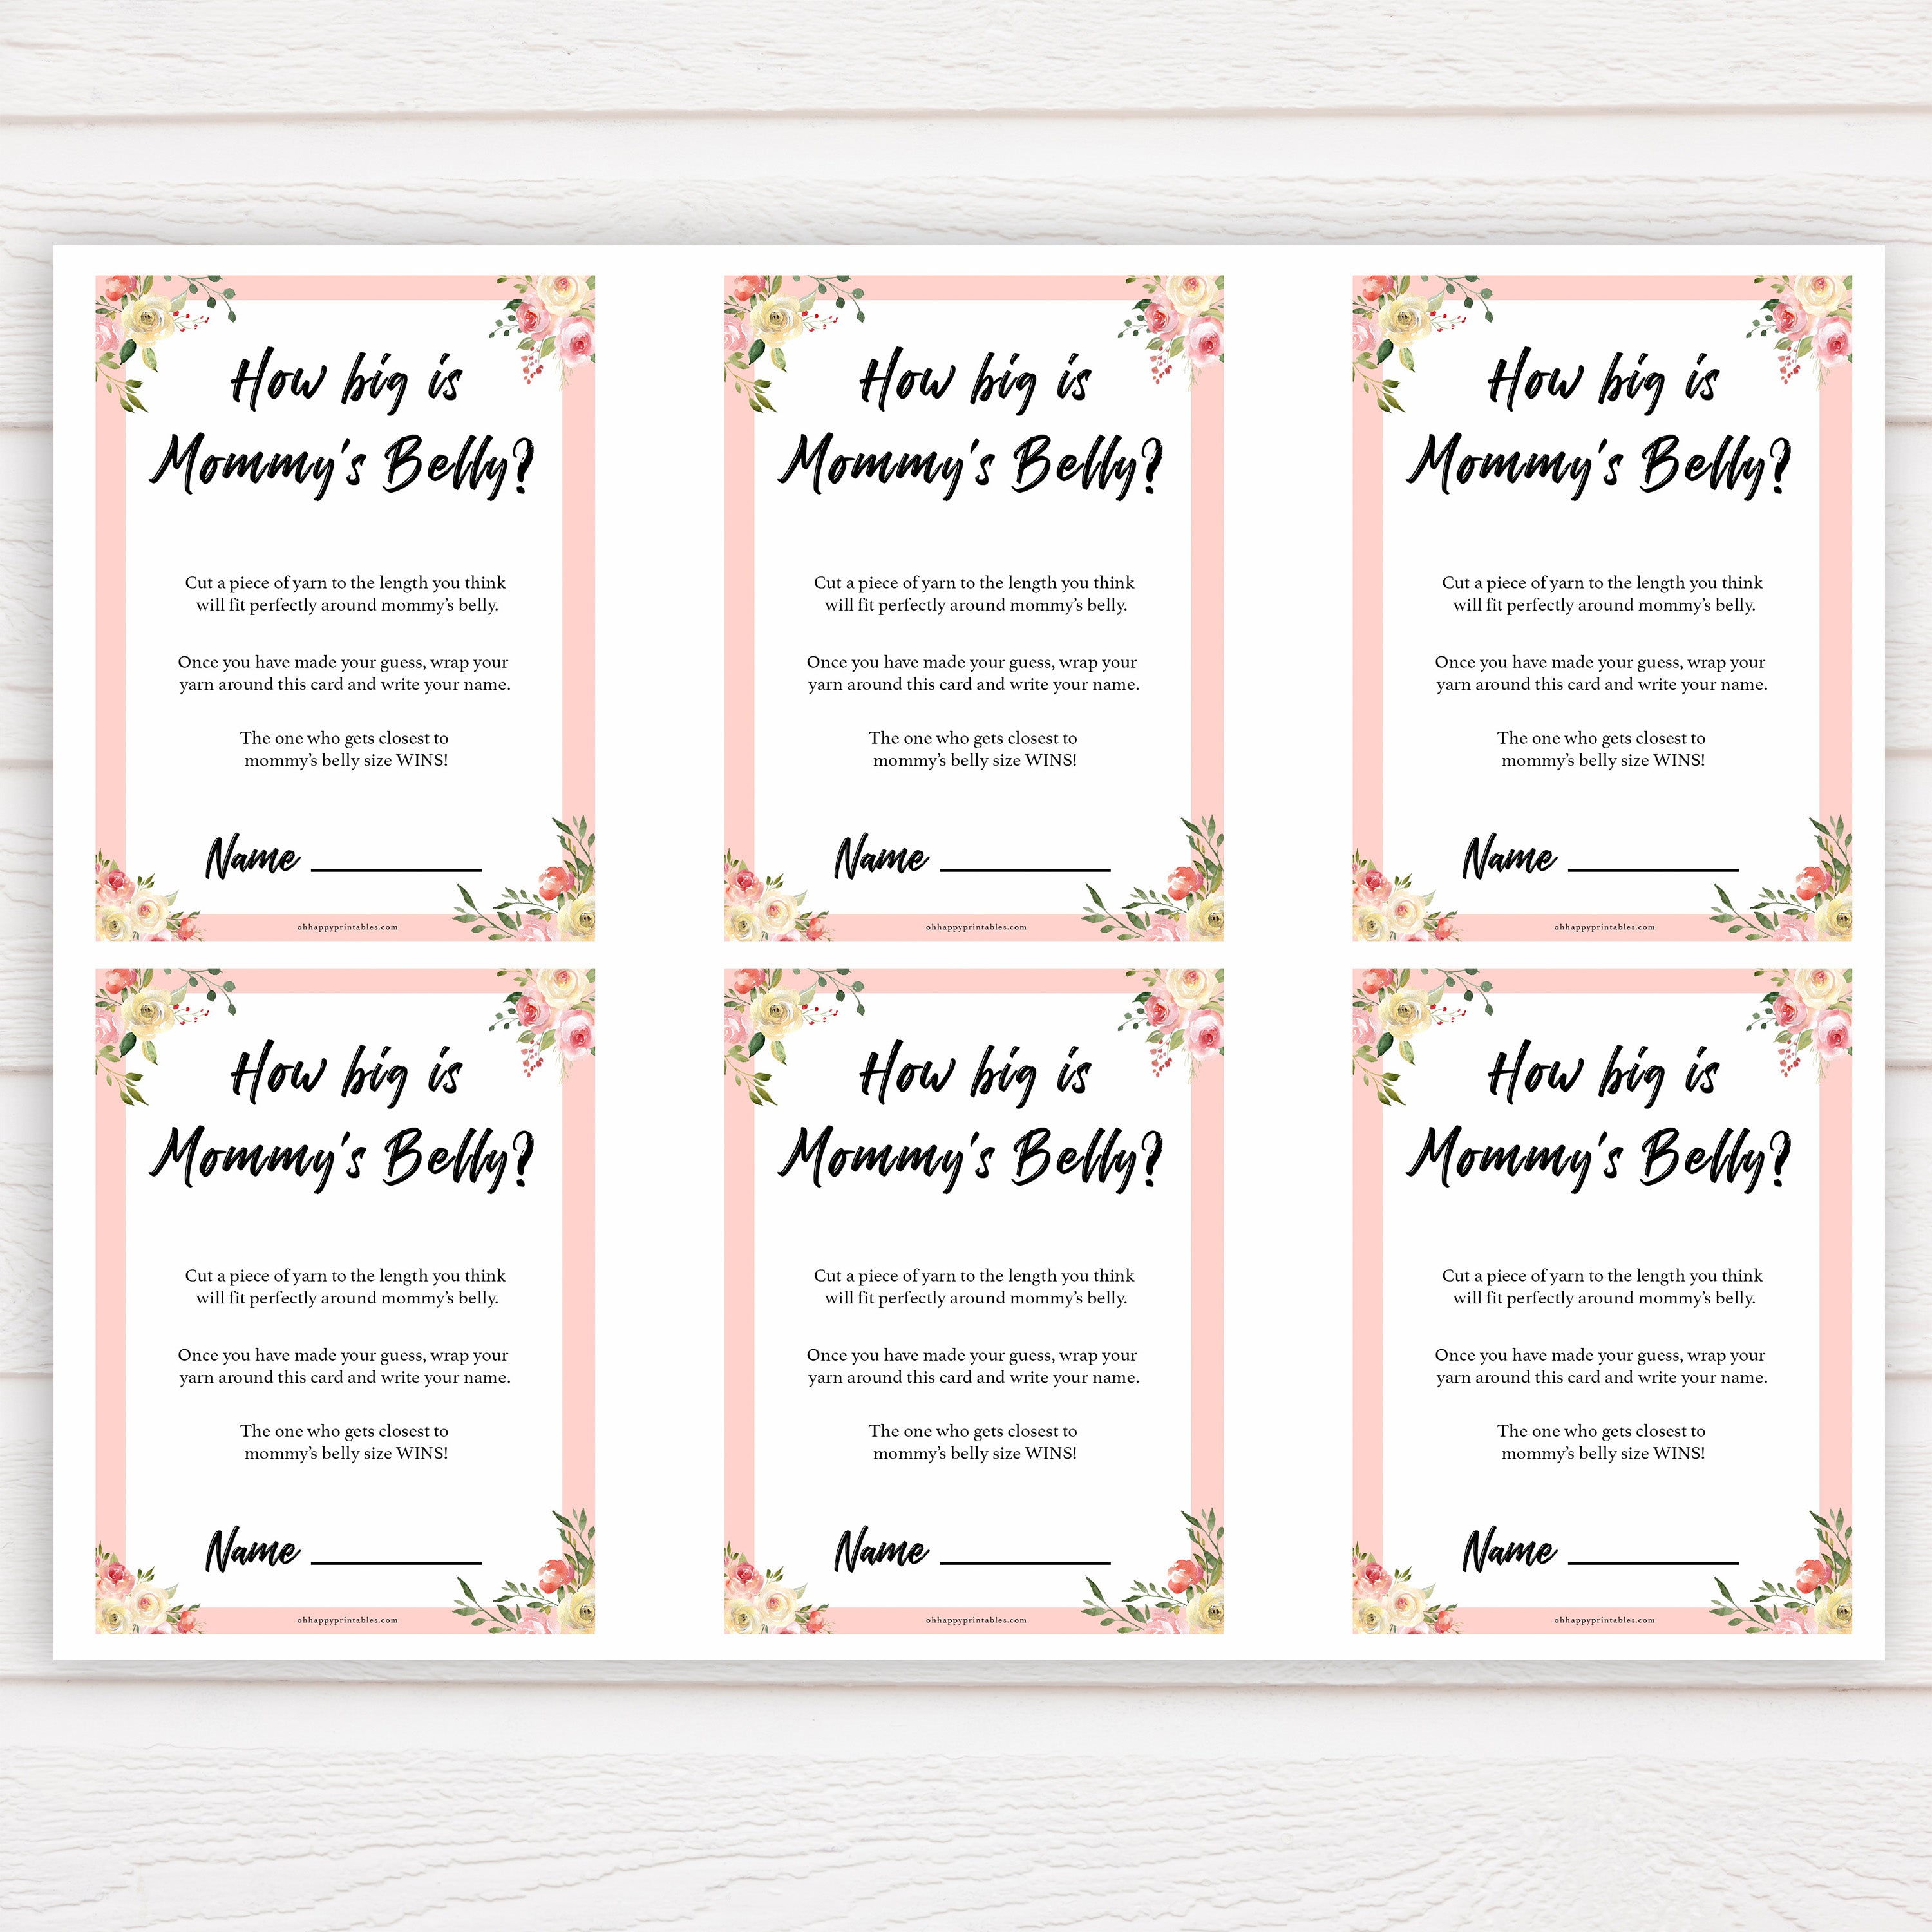 spring floral how big is mummys belly baby shower games, printable baby shower games, fun baby shower games, baby shower games, popular baby shower games